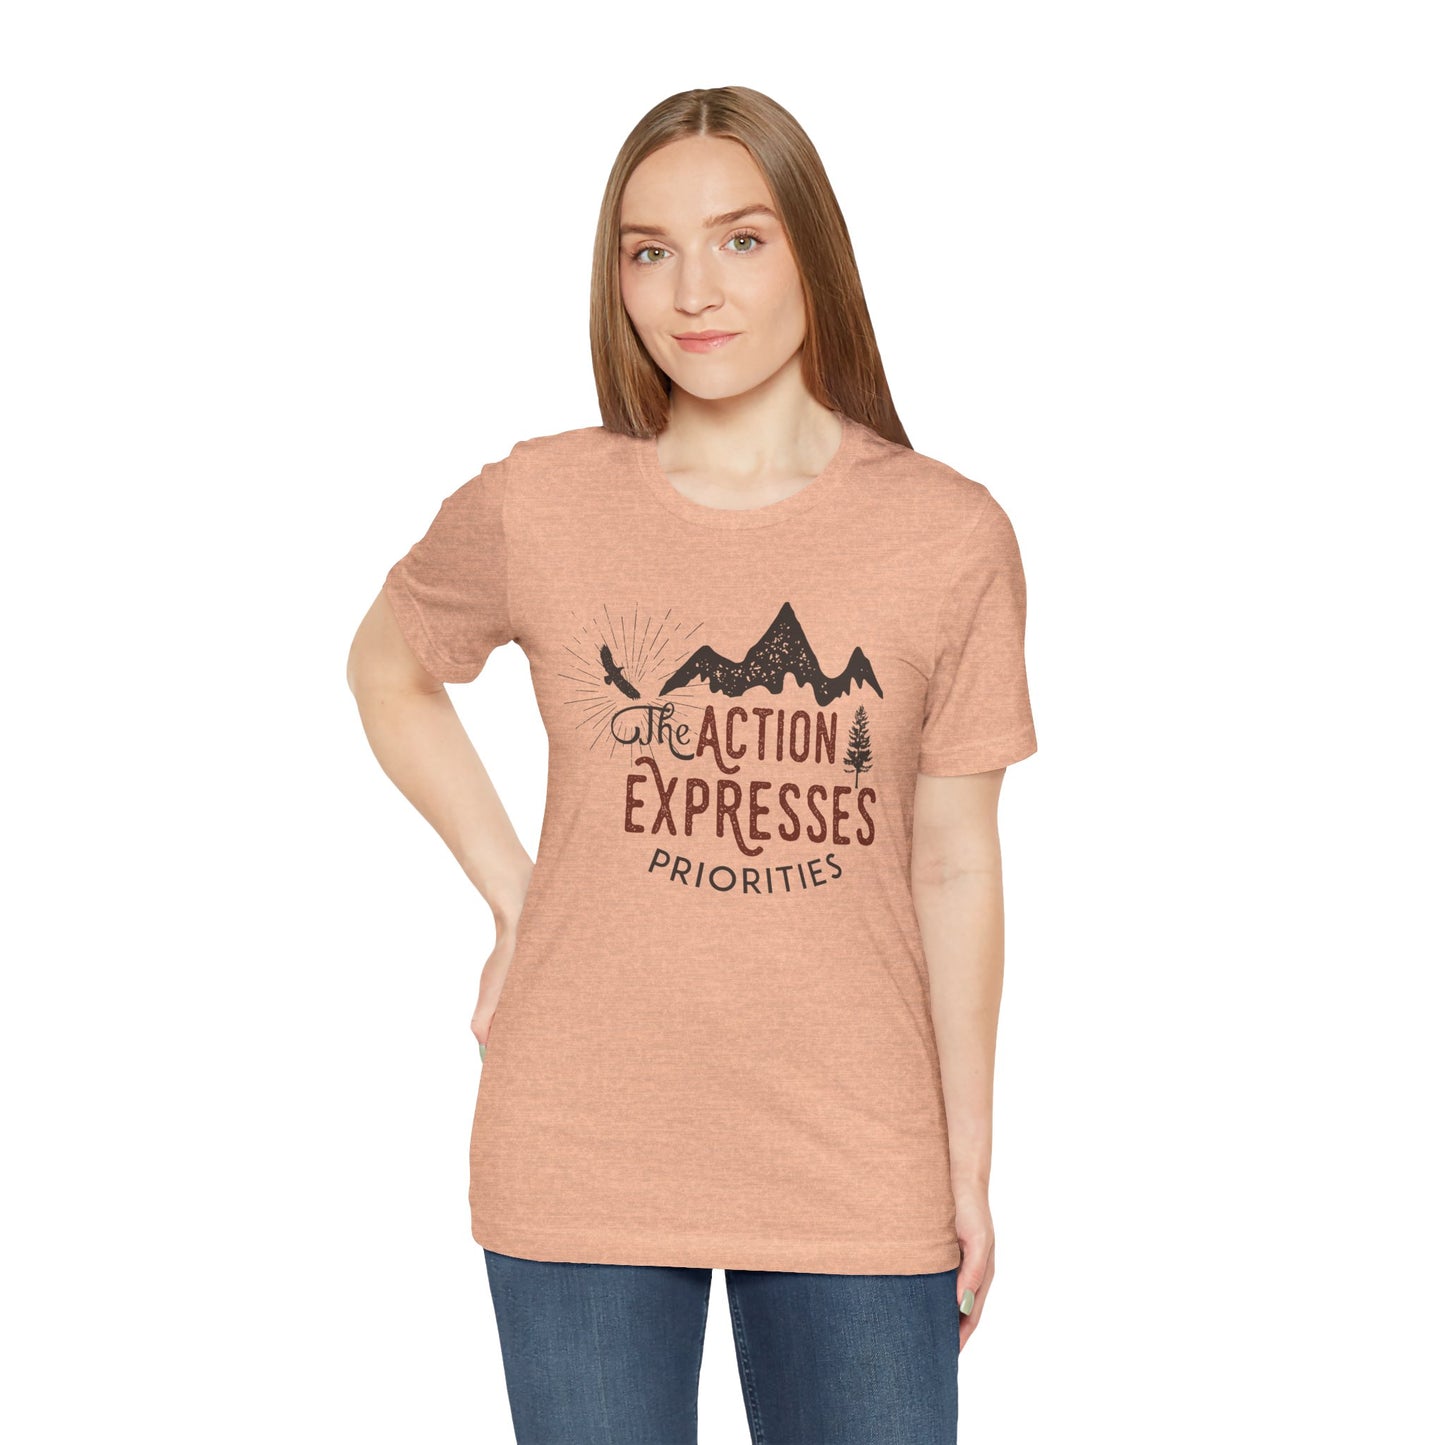 The Action Expresses Priorities Motivational Quote Short Sleeve T-Shirt - Unisex - Motivational Treats